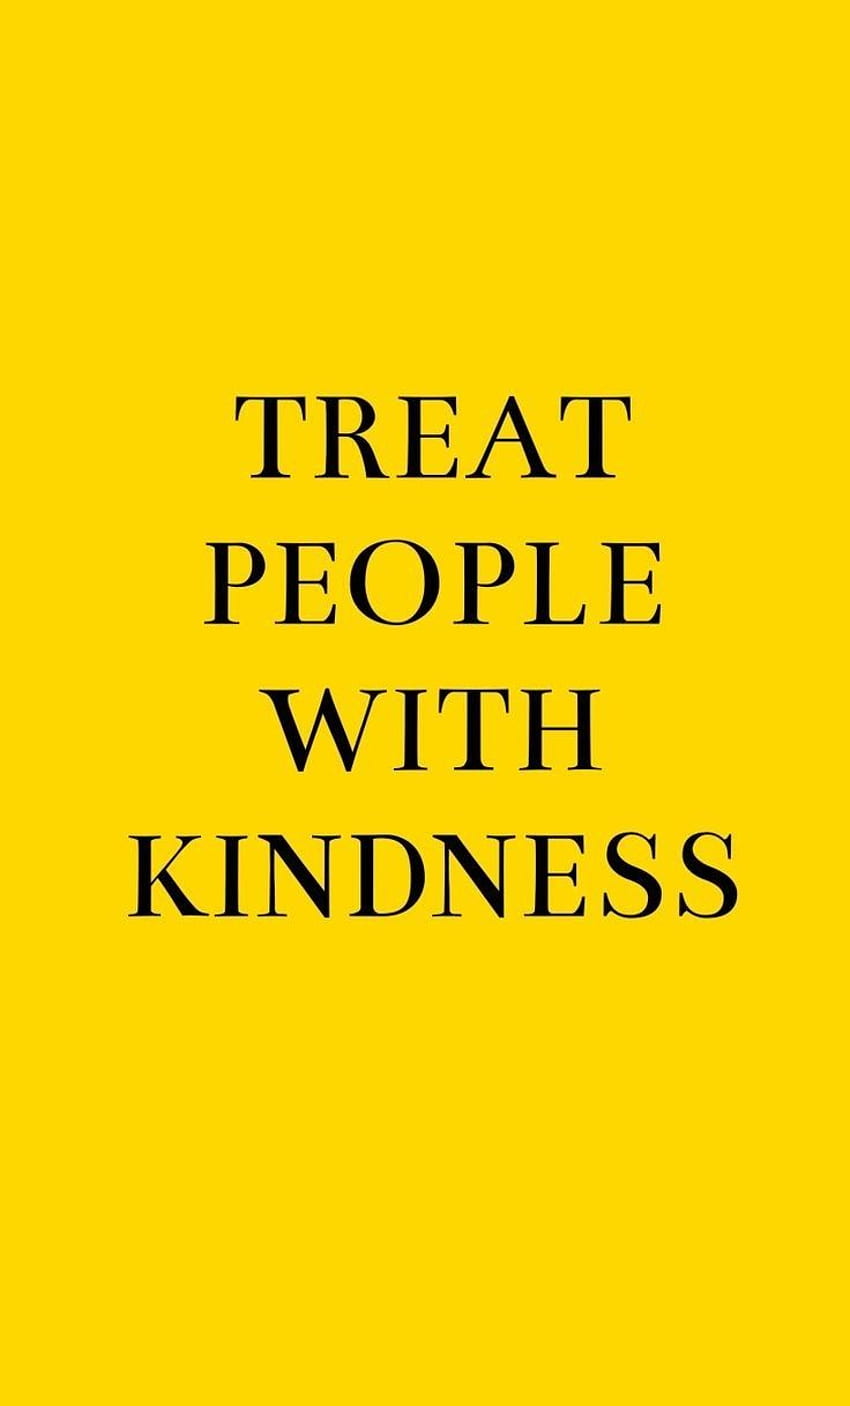 treat people with kindness / yellow HD phone wallpaper